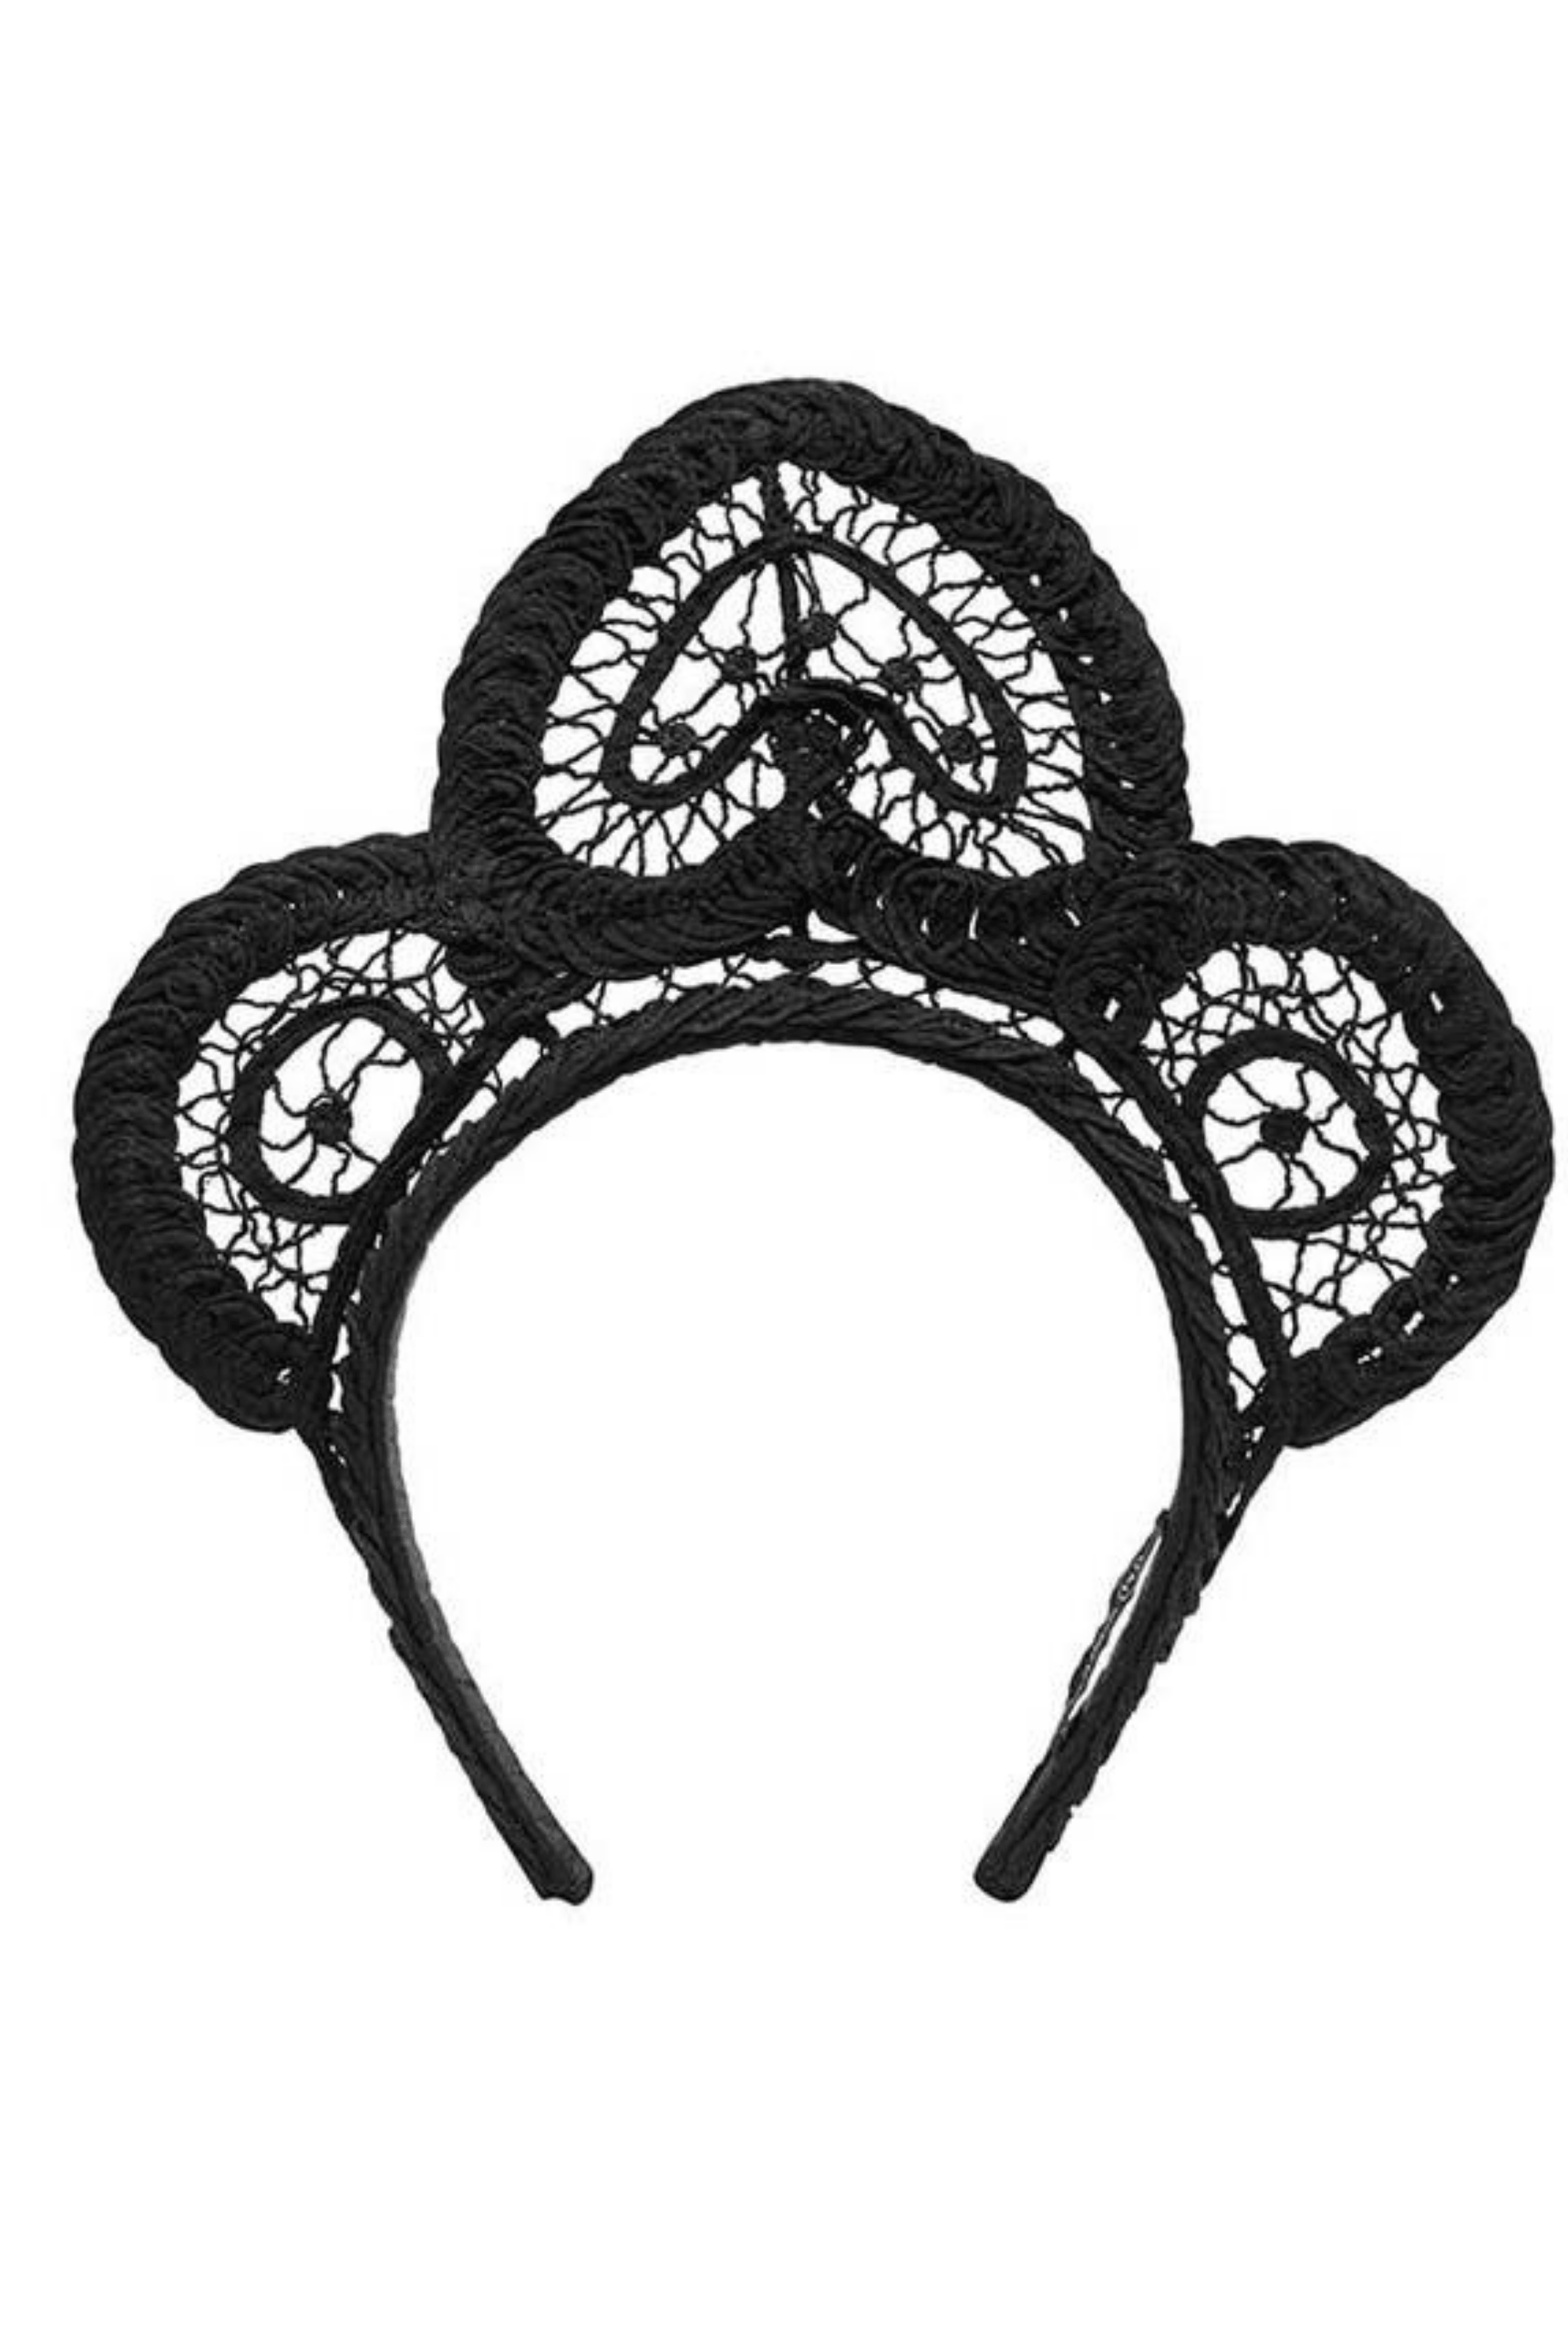 Heather Mcdowall HEATHER MCDOWALL Meghan Lace Headpiece - heather-mcdowall-meghan-lace-headpiece---rrp-000-dress-for-a-night-30754449.png